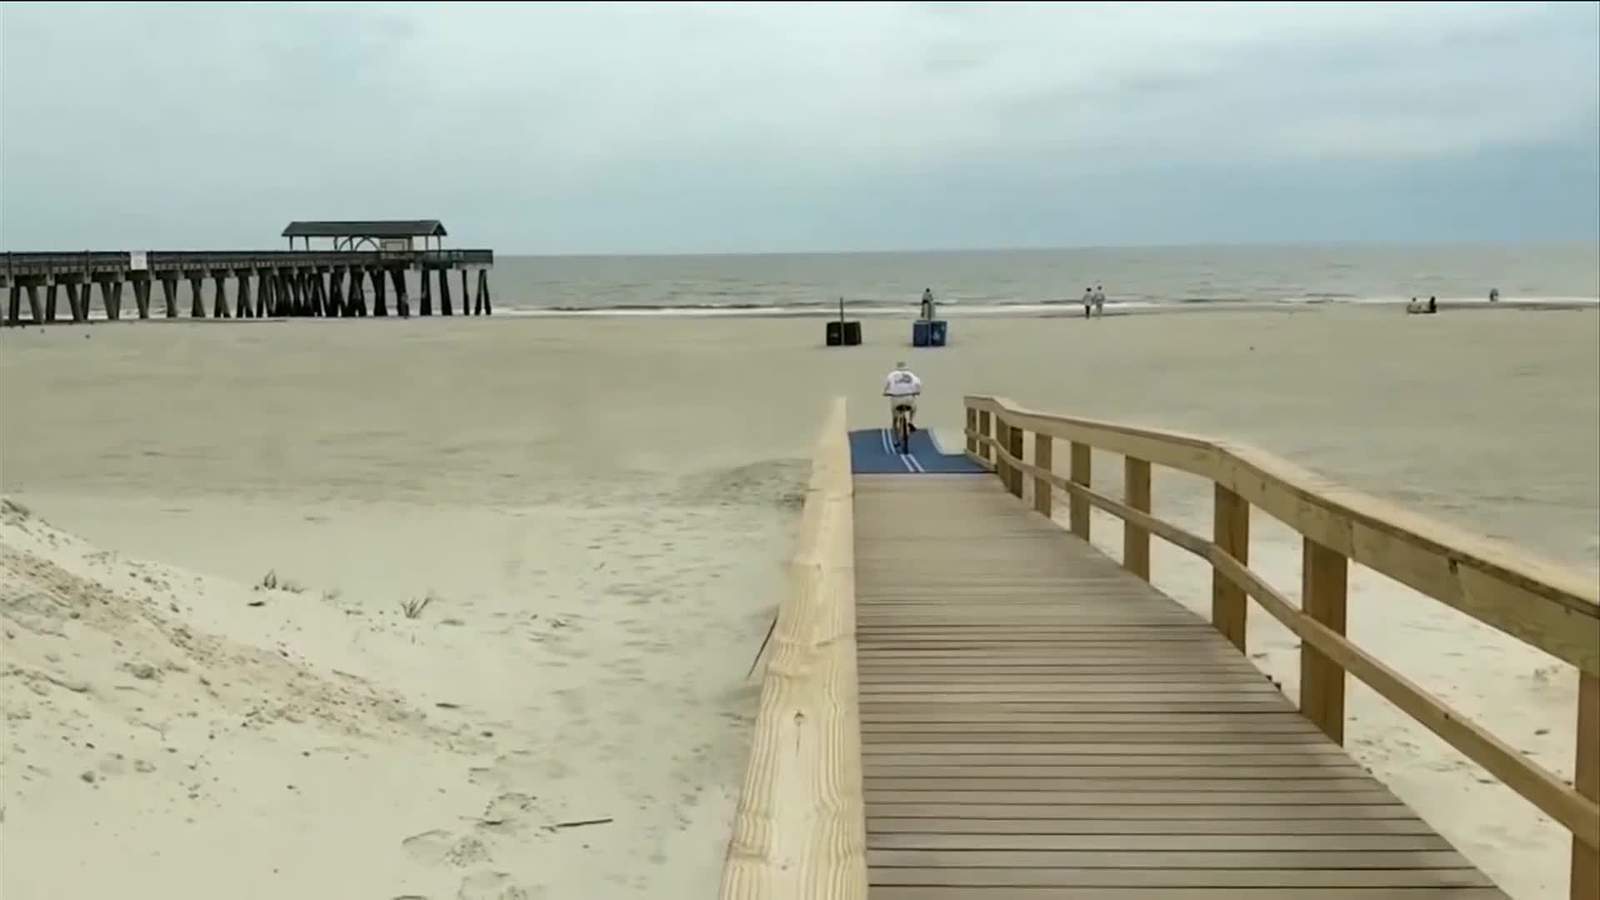 Mayor of Tybee Island assails Georgia governor’s ‘reckless mandate’ to reopen state’s beaches